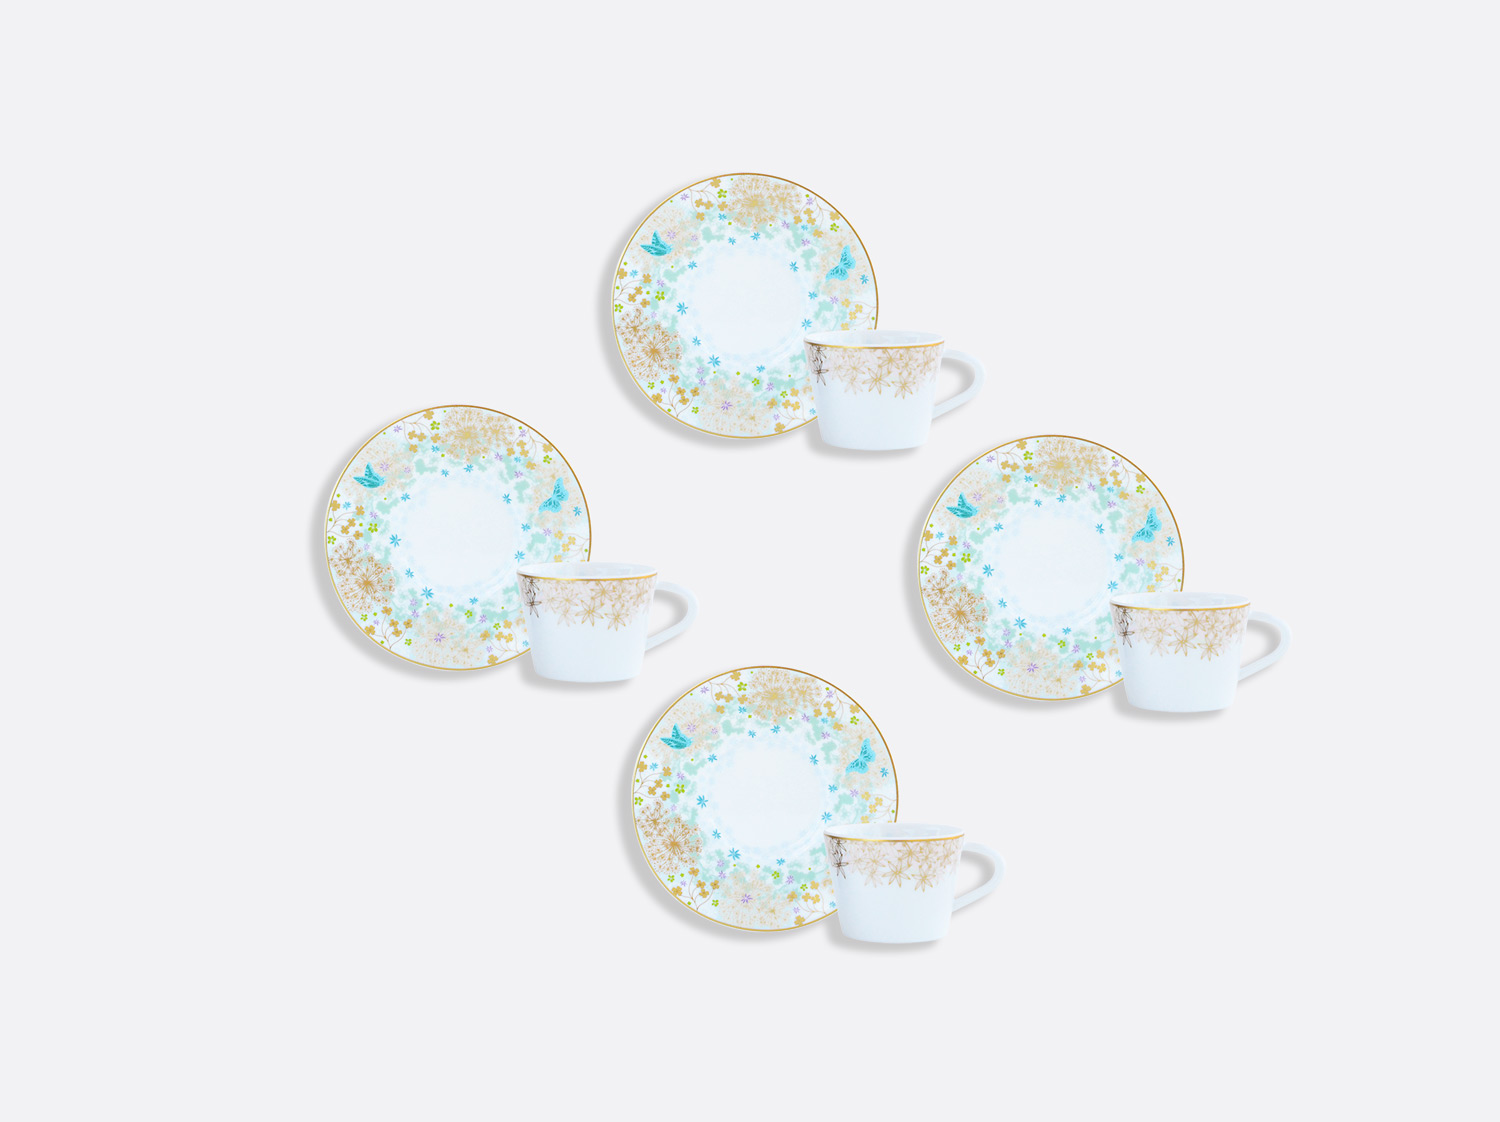 China Espresso cup and saucer gift box - 2 Oz - Set of 4 of the collection FÉERIE - MICHAËL CAILLOUX | Bernardaud